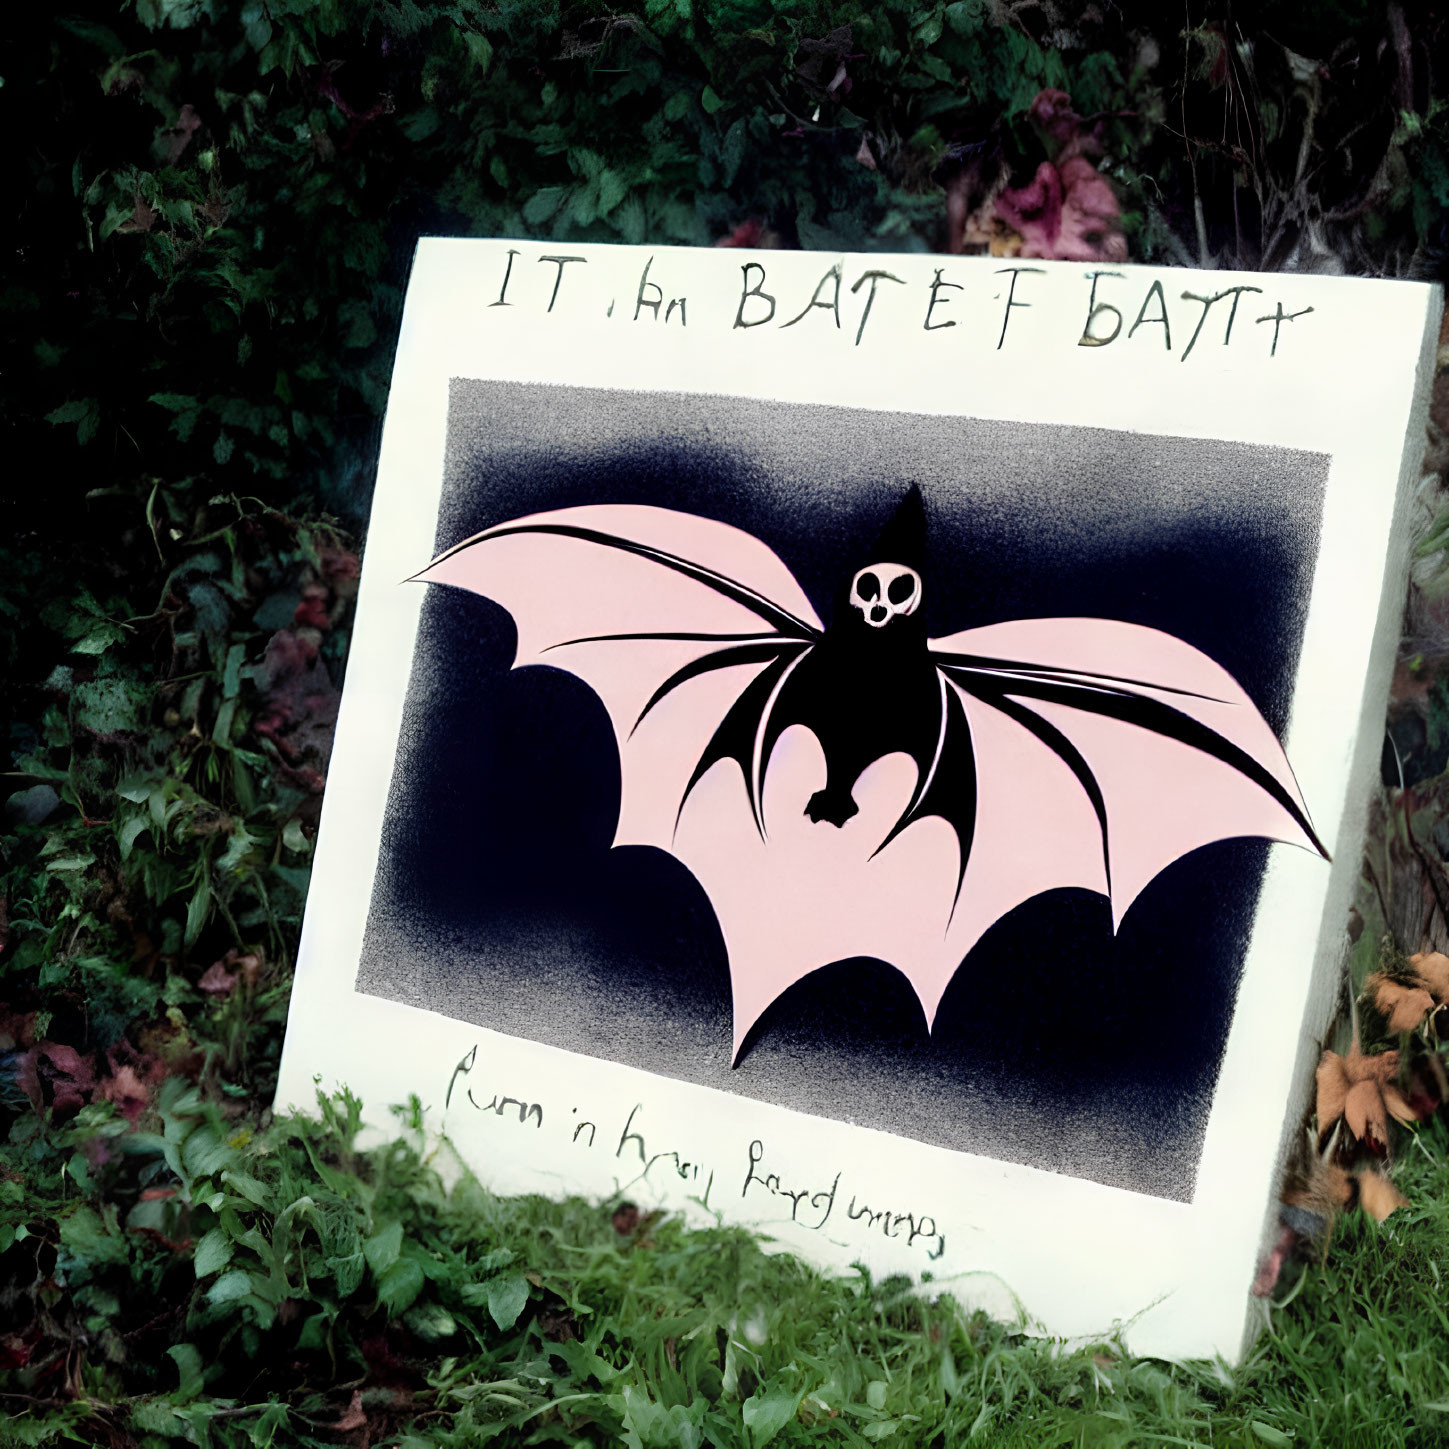 Handmade sign featuring stylized bat drawing and playful text on foliage